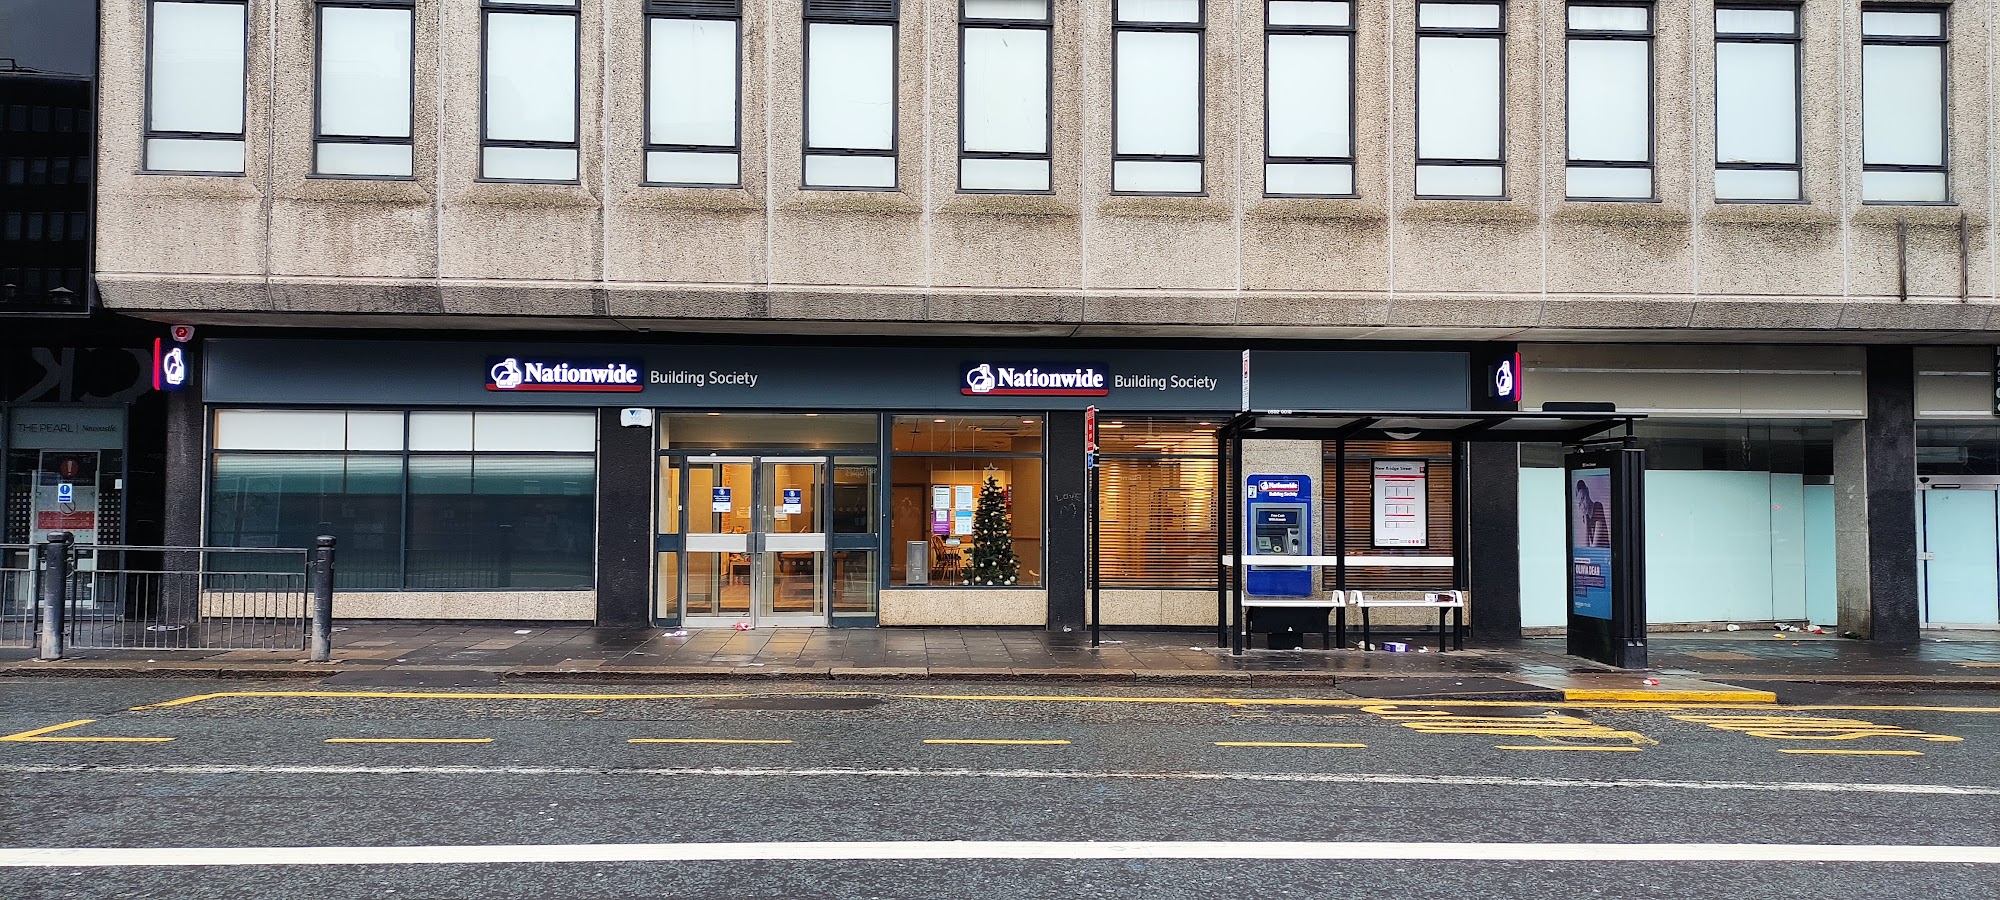 Nationwide Building Society